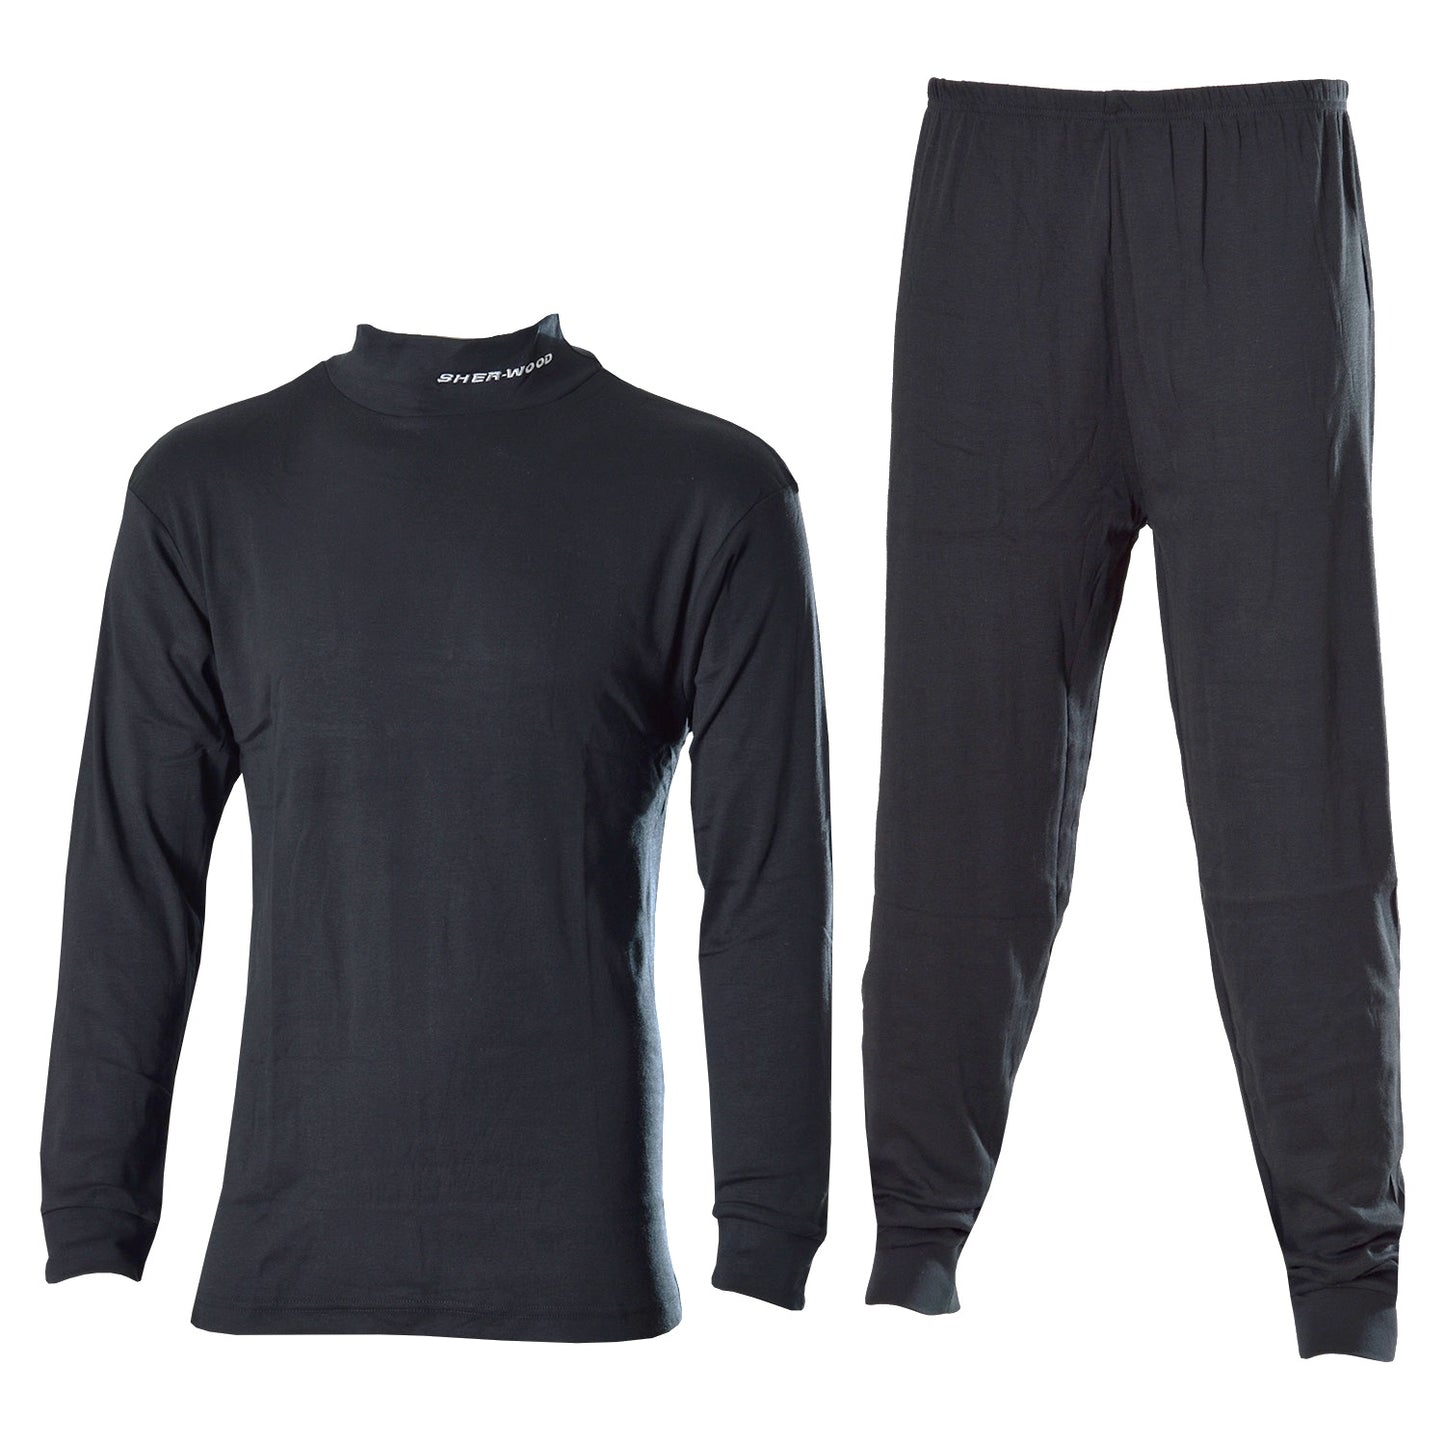 Sher-Wood sweat suit top and bottom underwear ice hockey